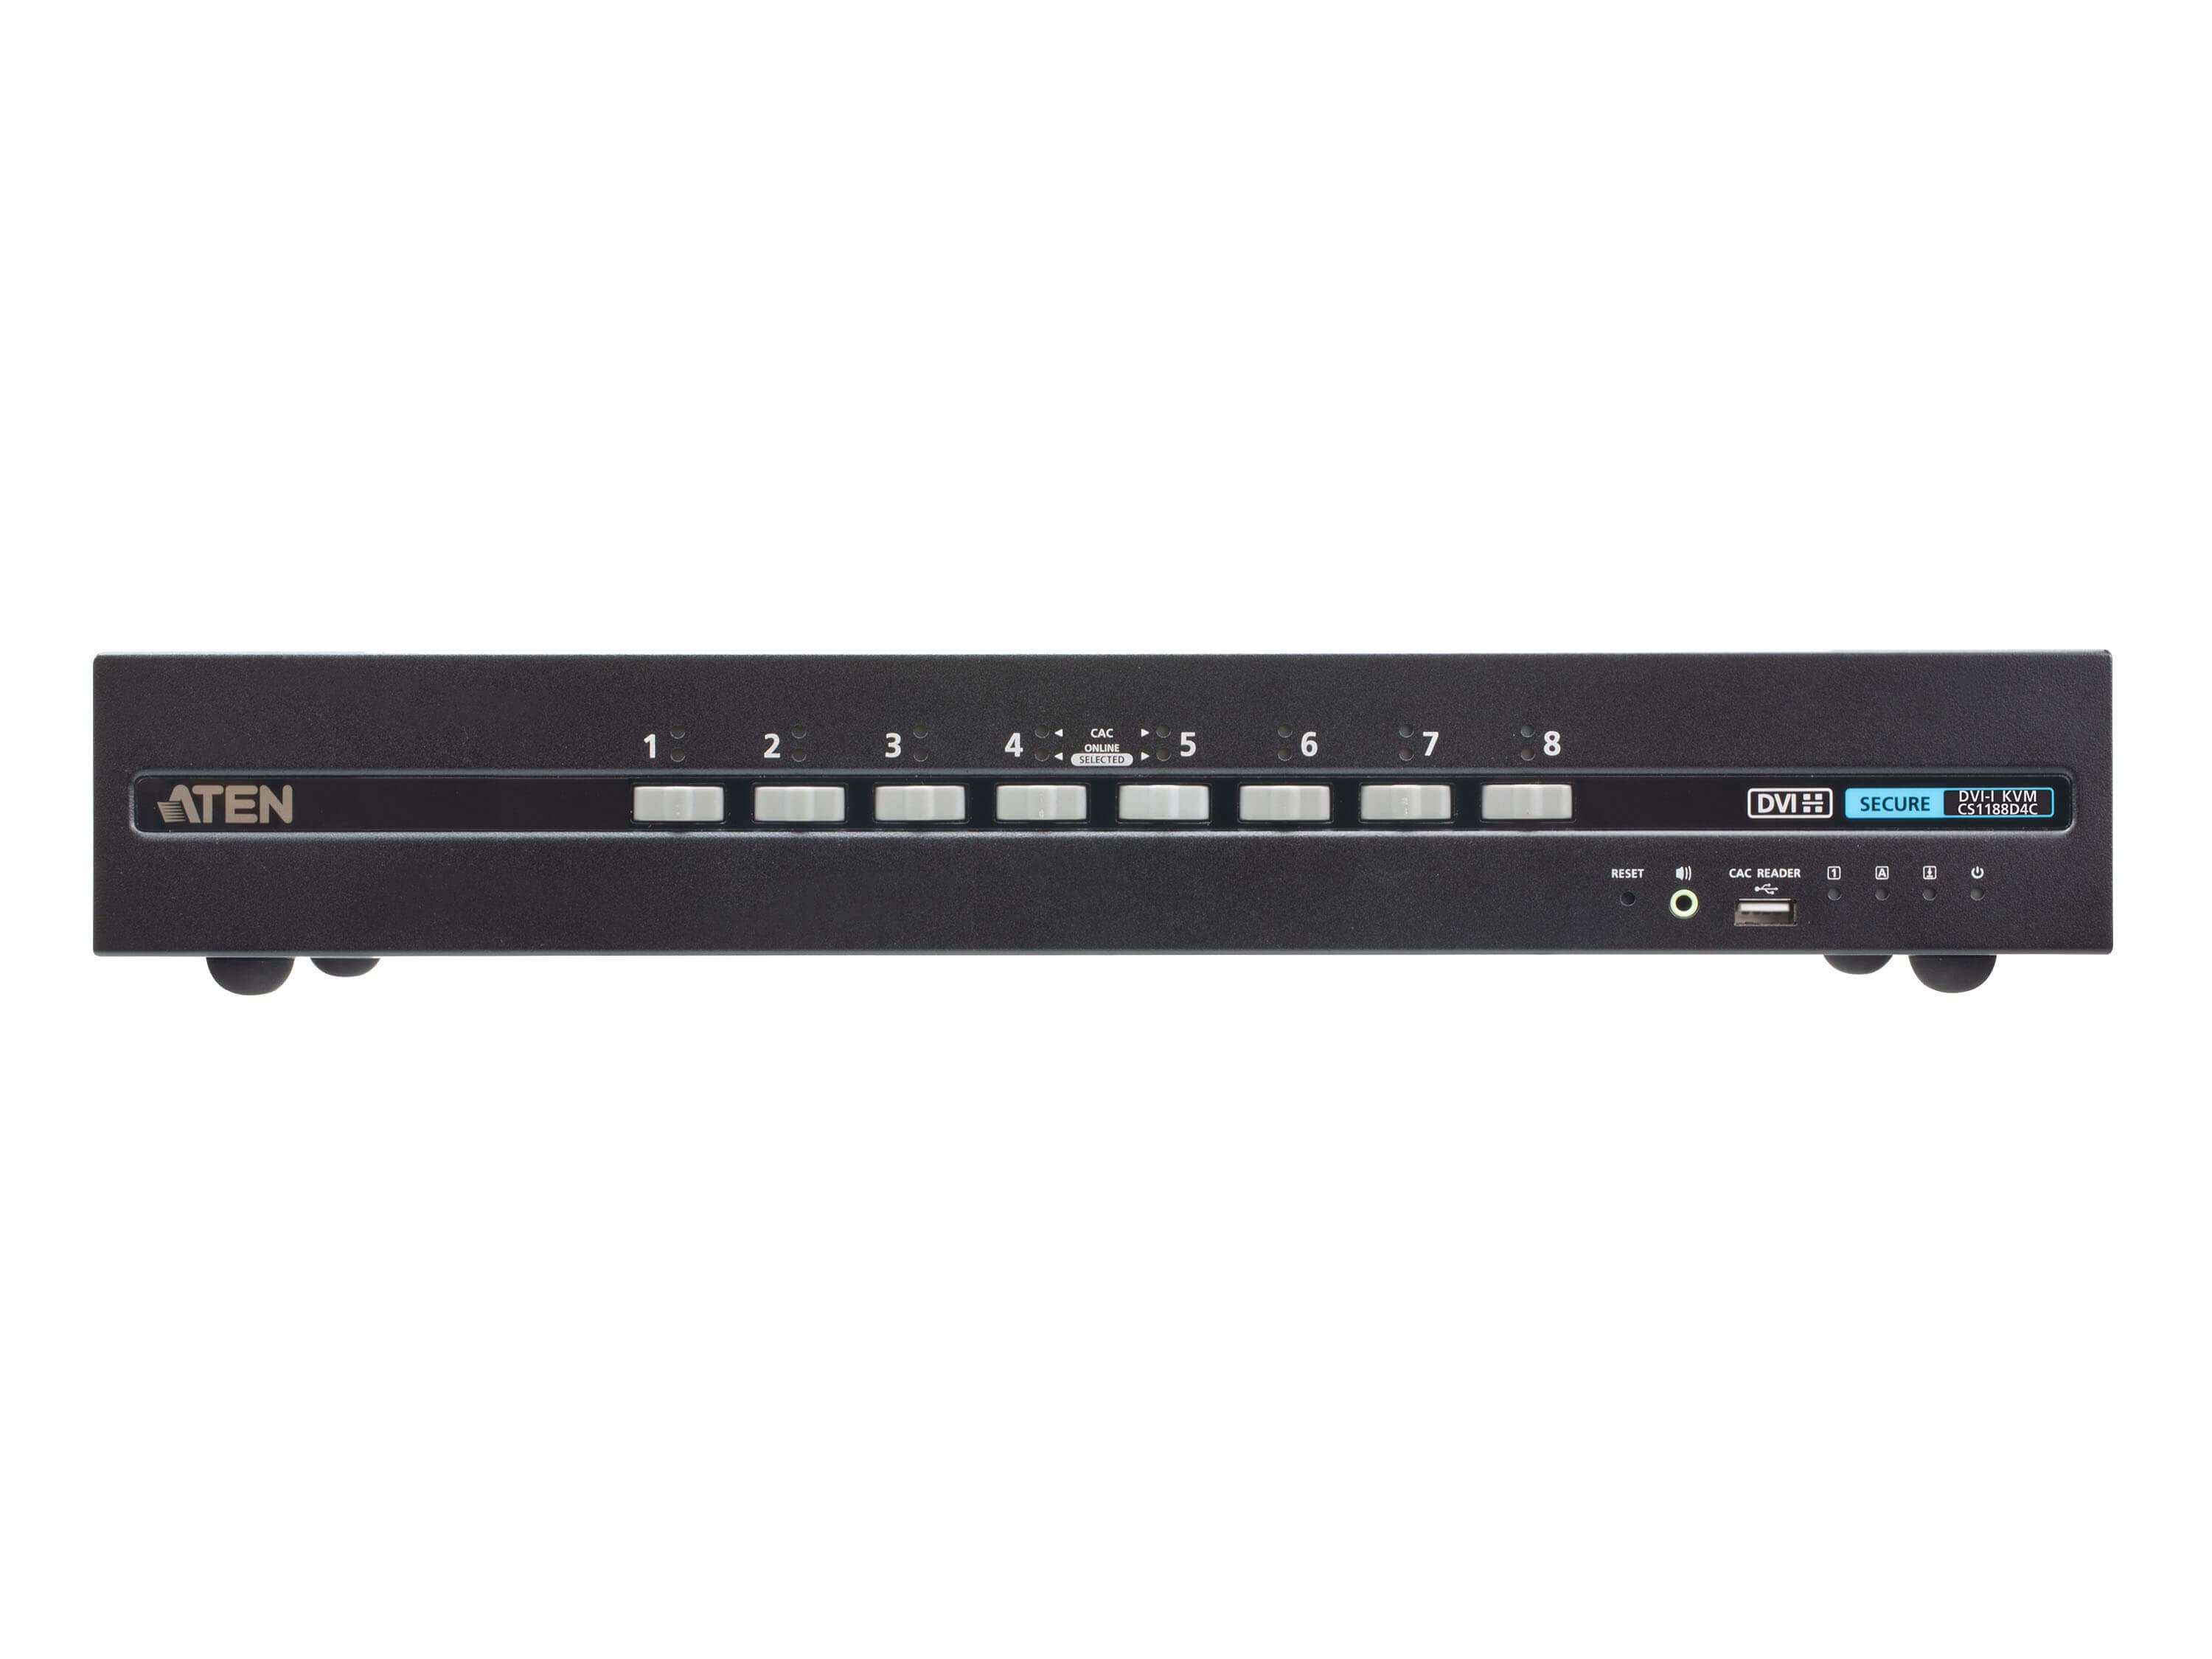 CS1188D4C 8-Port USB DVI Secure KVM Switch with CAC (PSD PP v4.0 Compliant) by Aten